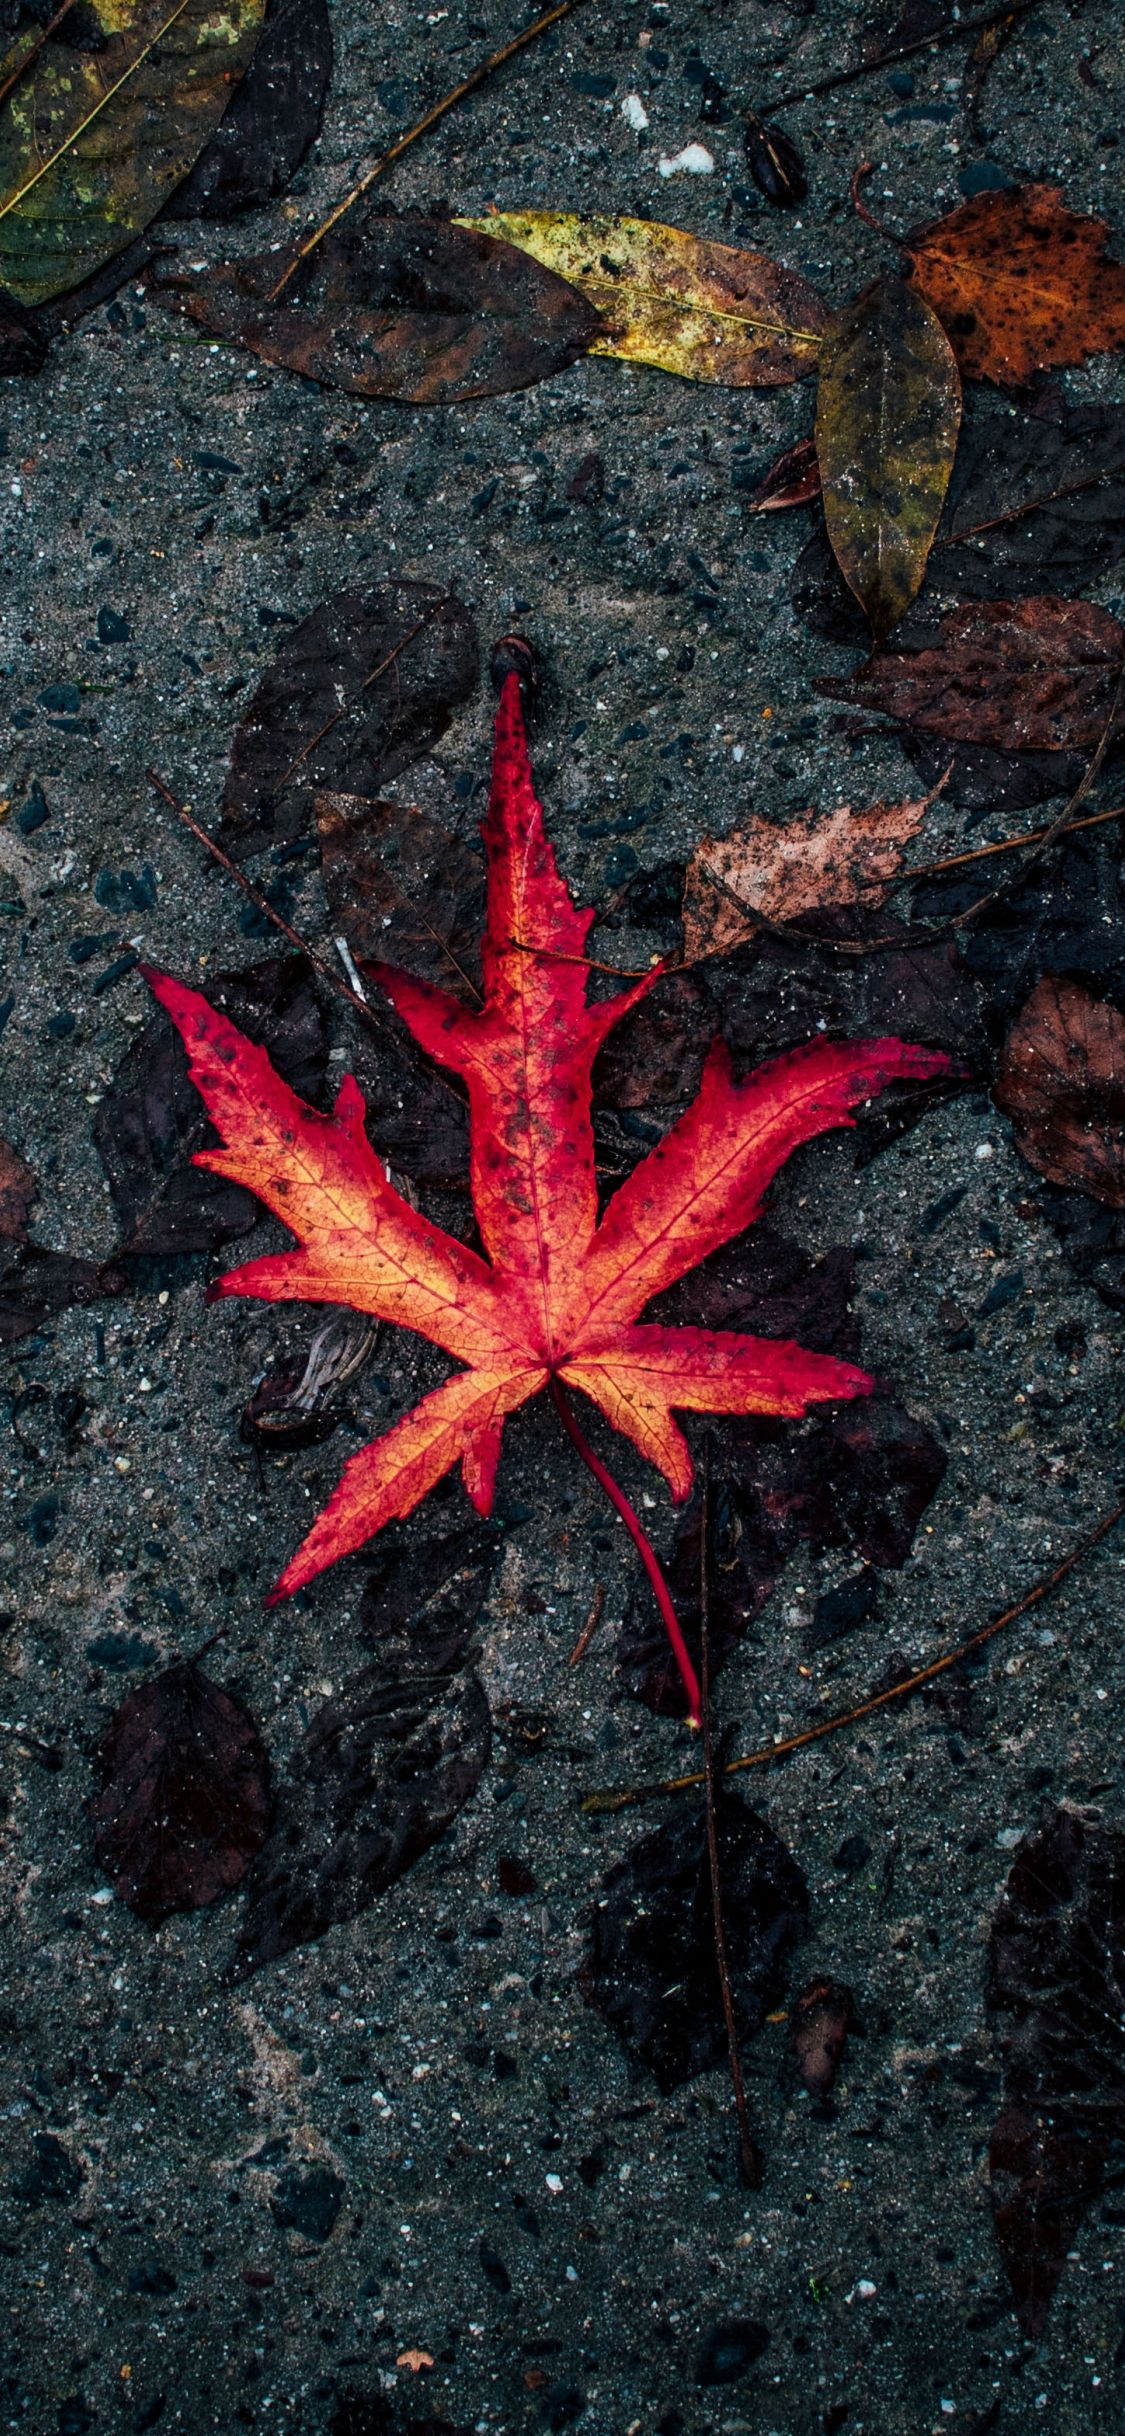 Download 1125x2436 wallpaper leaf, fall, autumn, iphone x 1125x2436 HD image, background, 706